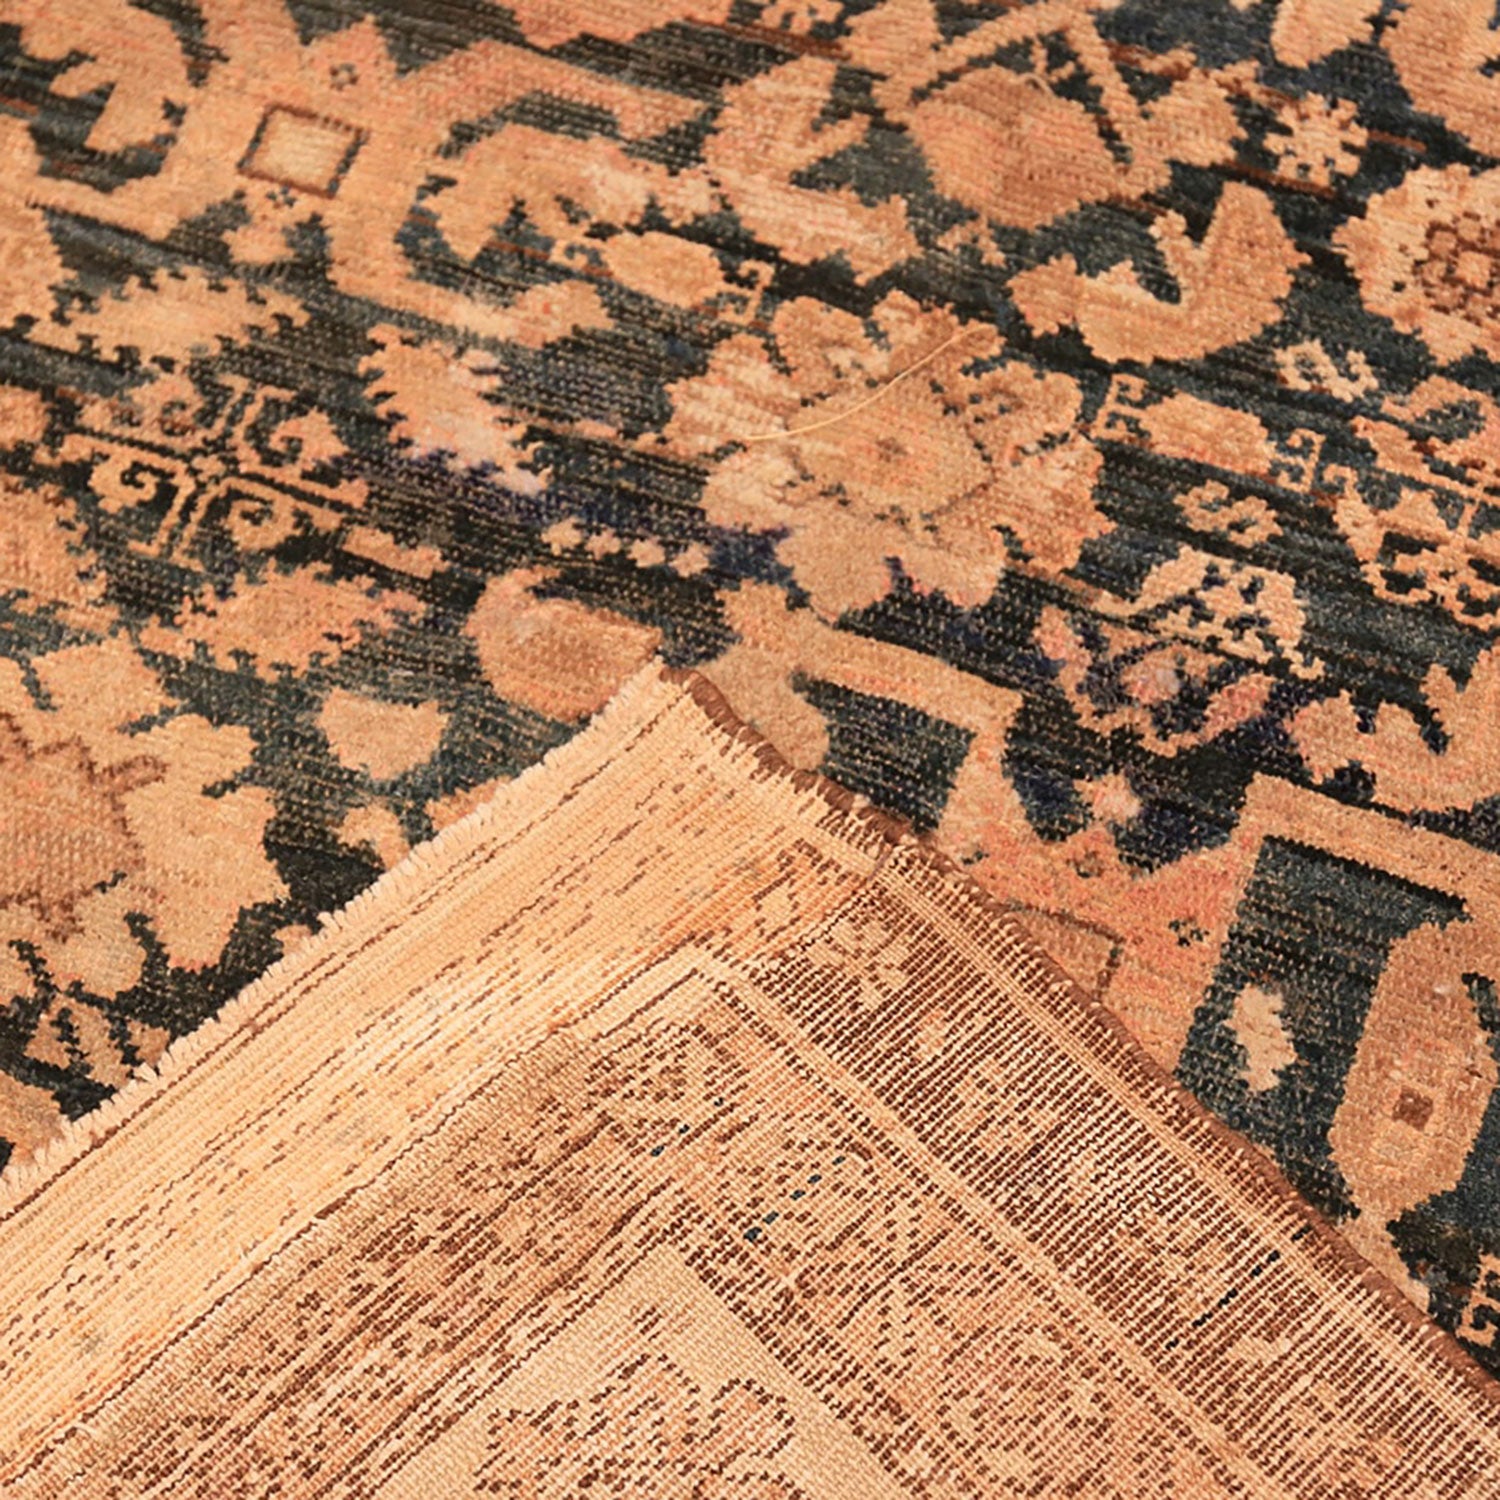 Intricate, traditional rug with floral motifs exhibits signs of age.